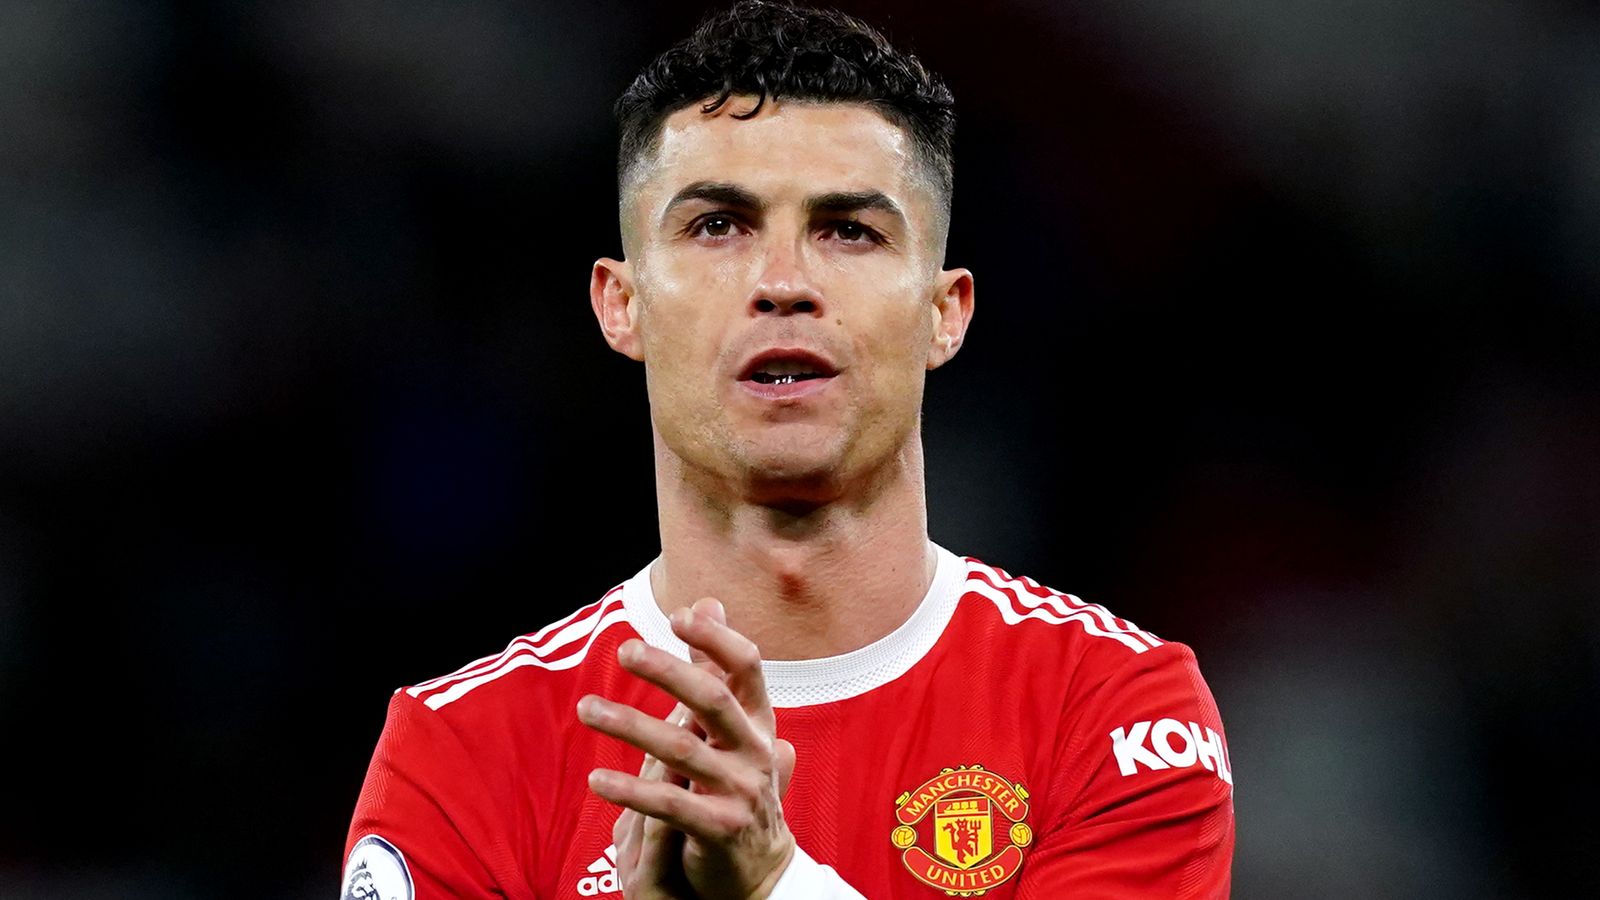 Cristiano Ronaldo: Manchester United Legend Asks To Leave Club Amid Concerns Over Trophies And Transfers